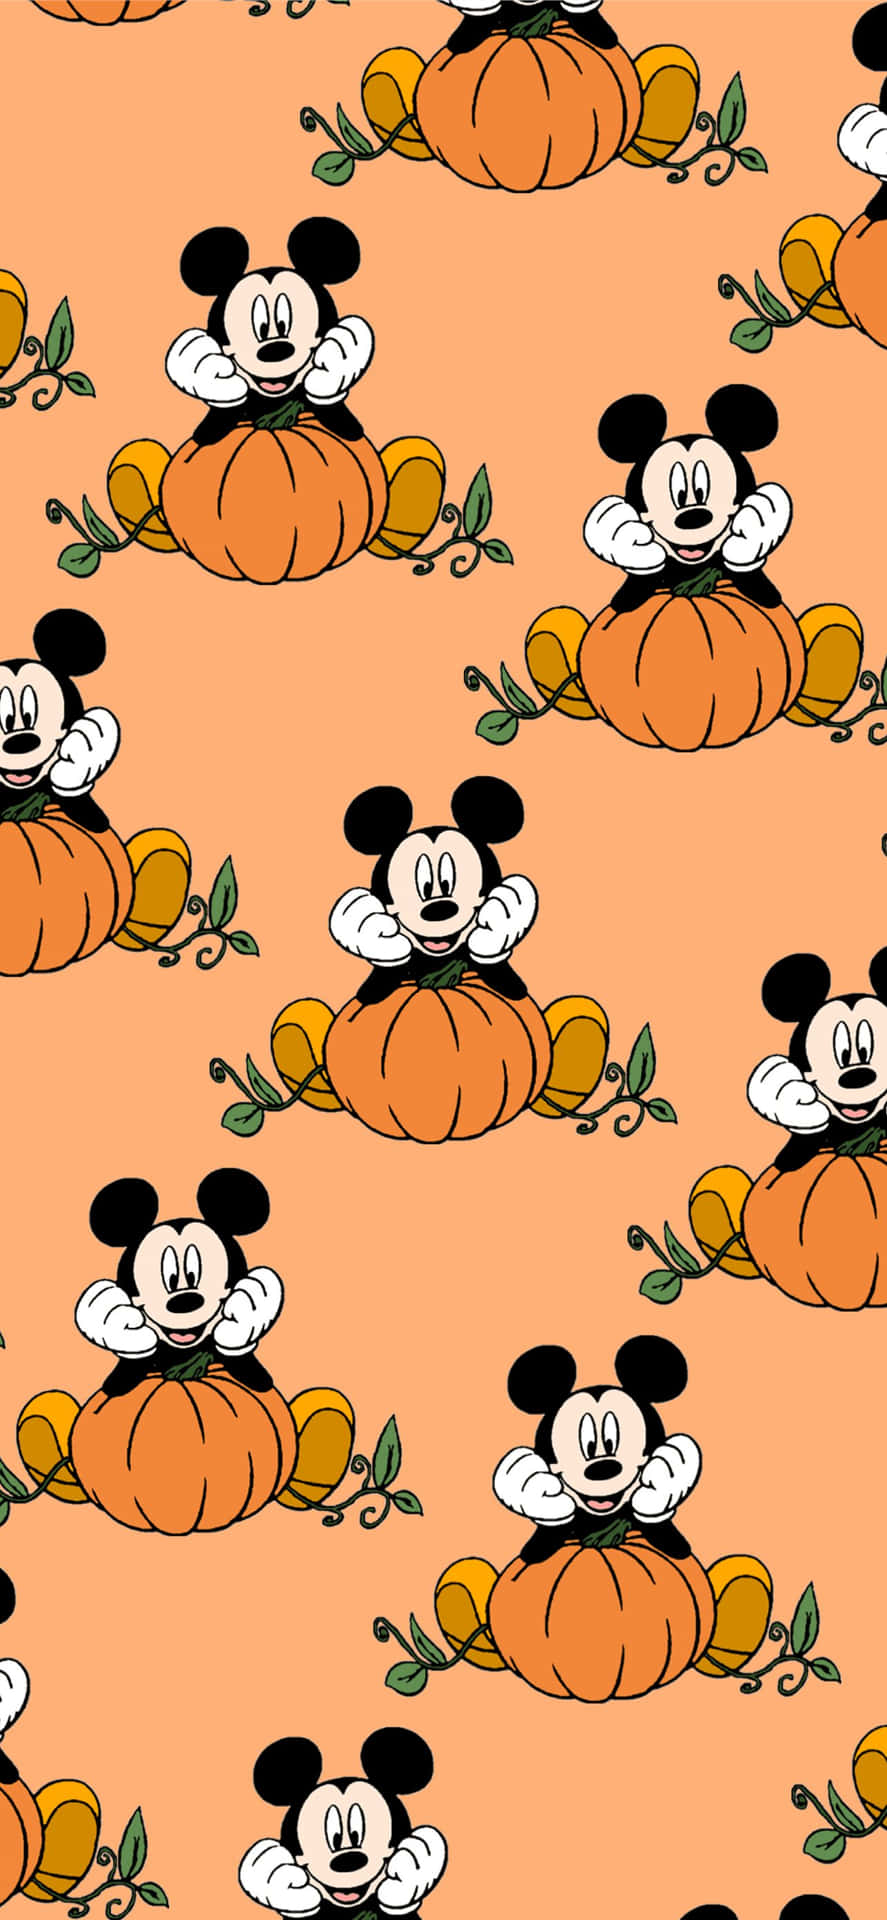 Get Ready For A Girly Halloween Wallpaper